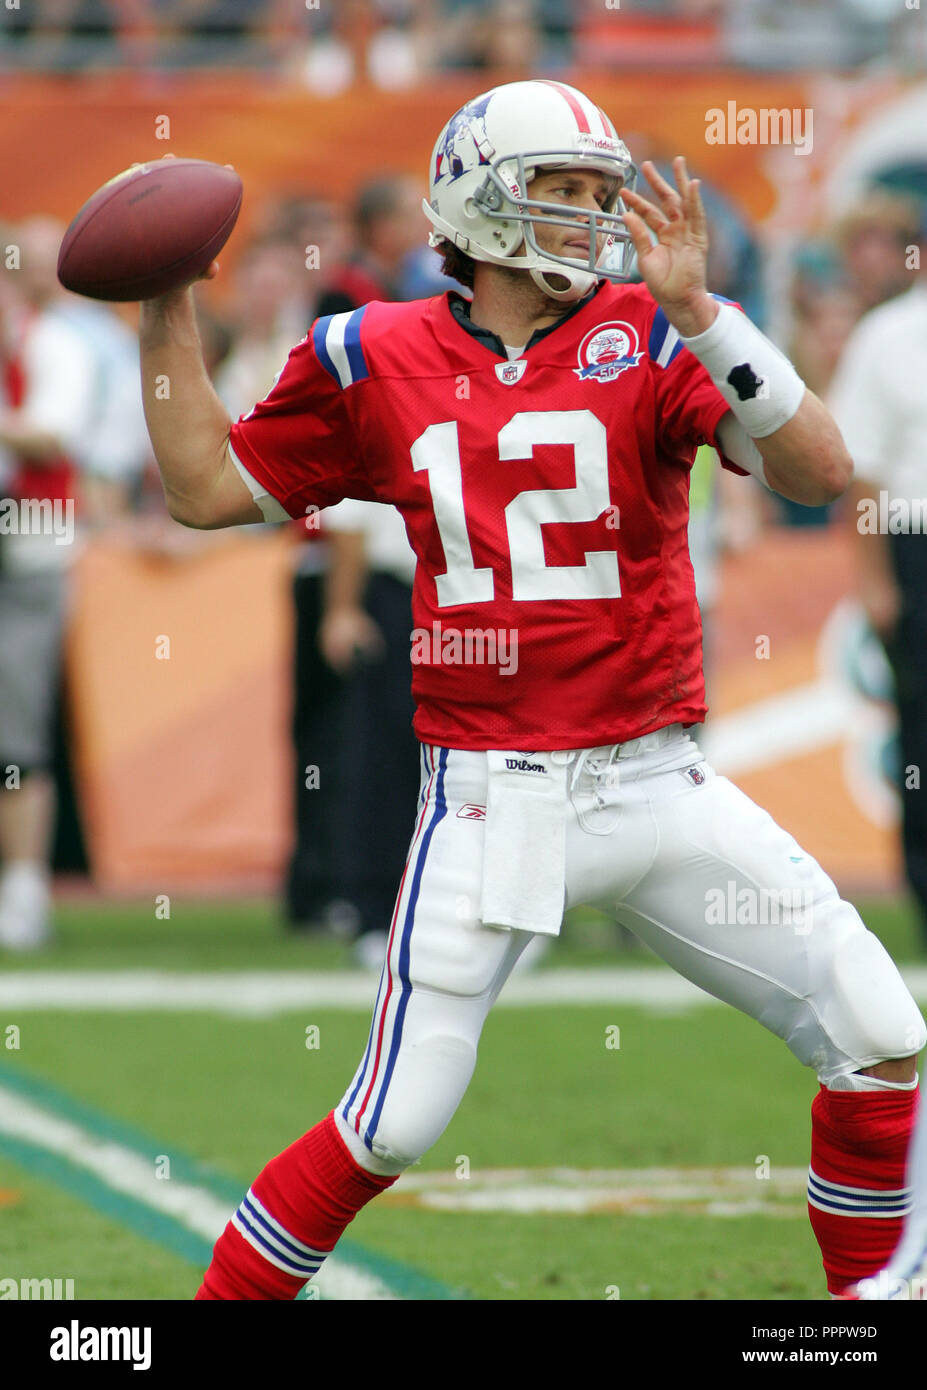 New England Patriots quarterback Tom Brady passes for 352 yards, two touchdowns and two interceptions against the Miami Dolphins at Landshark stadium in Miami on December 6, 2009. Stock Photo